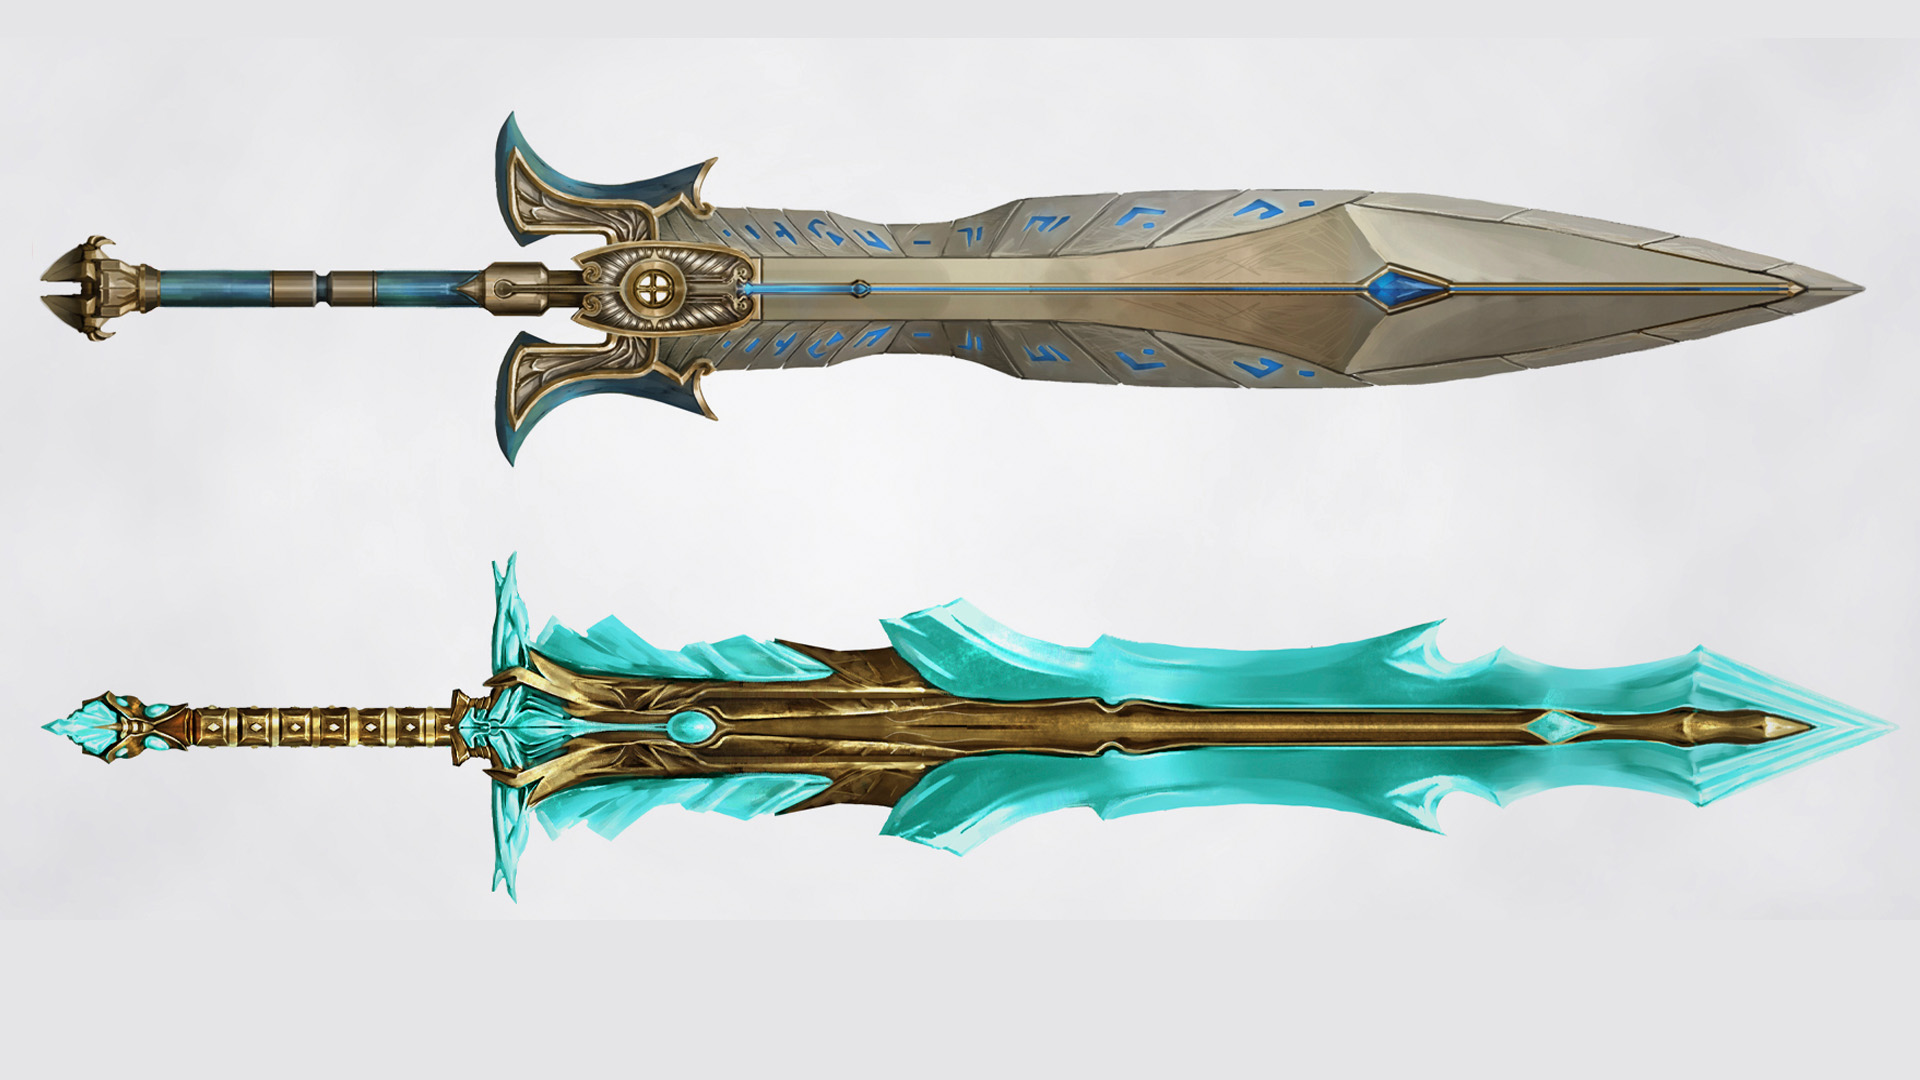 Creating Weapon Aspects Based on God of War Weapons - Sword, Spear